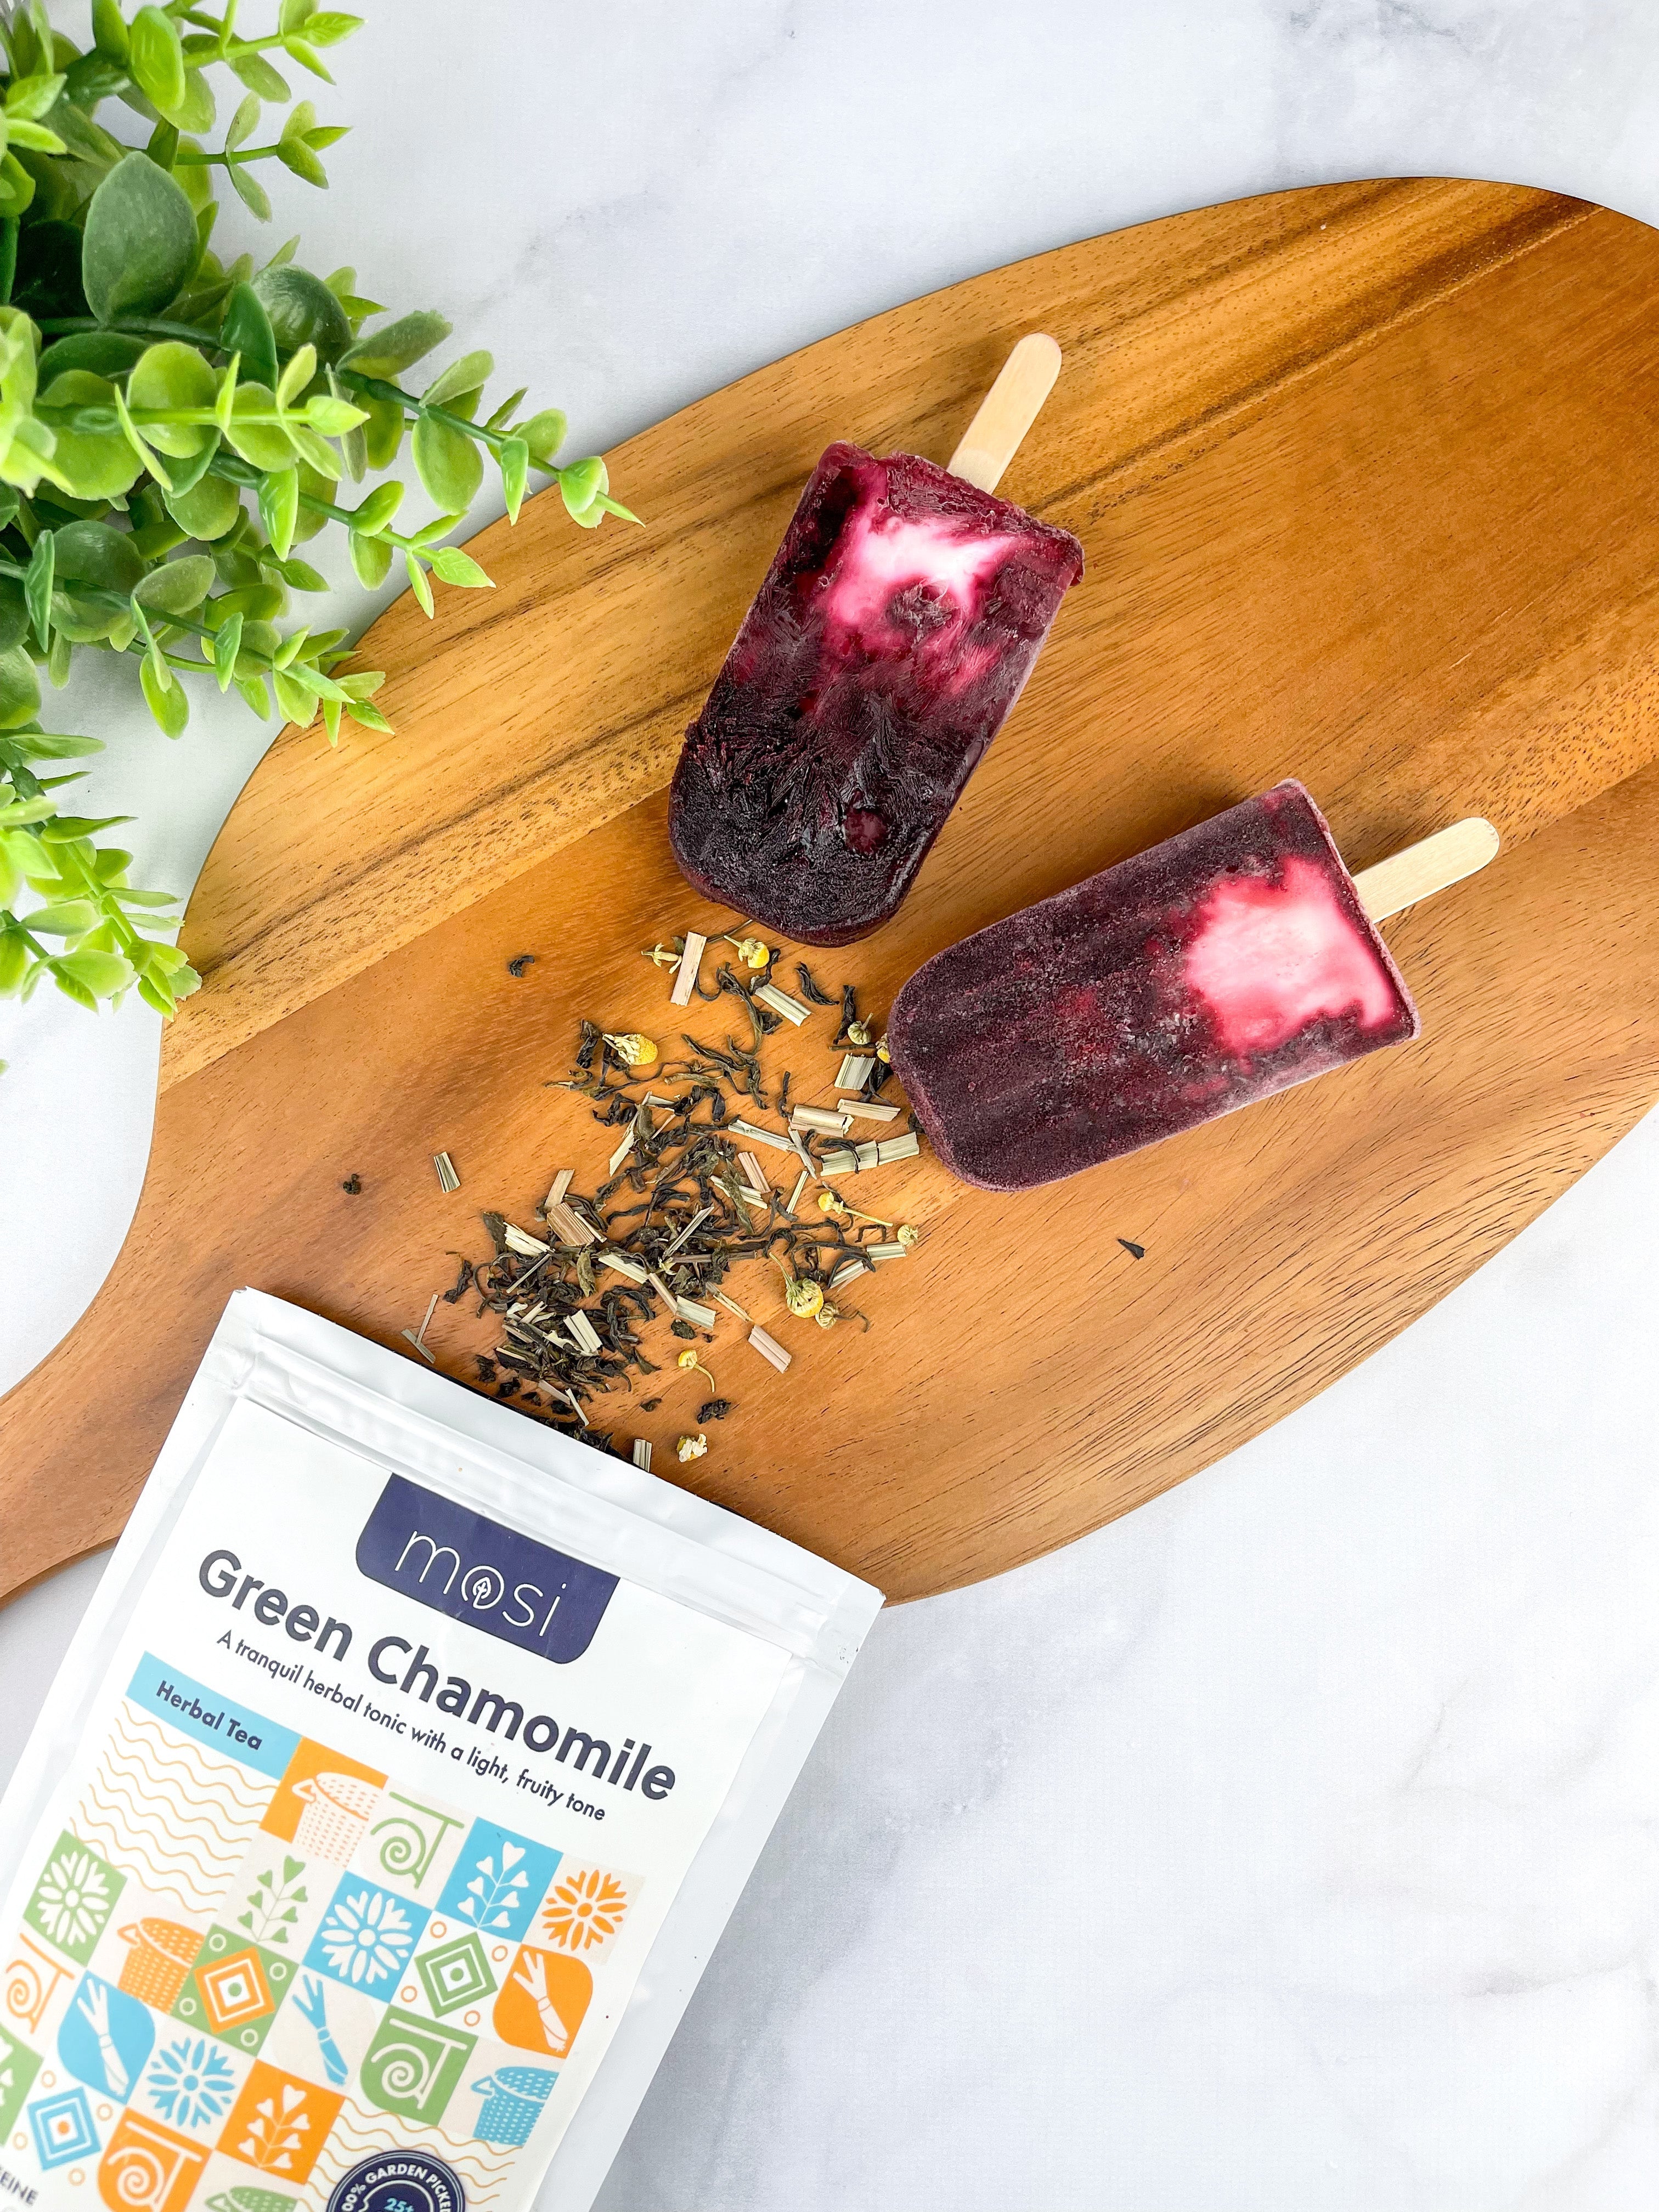 Summer Cherry and Green Chamomile Popsicles - Mosi Tea